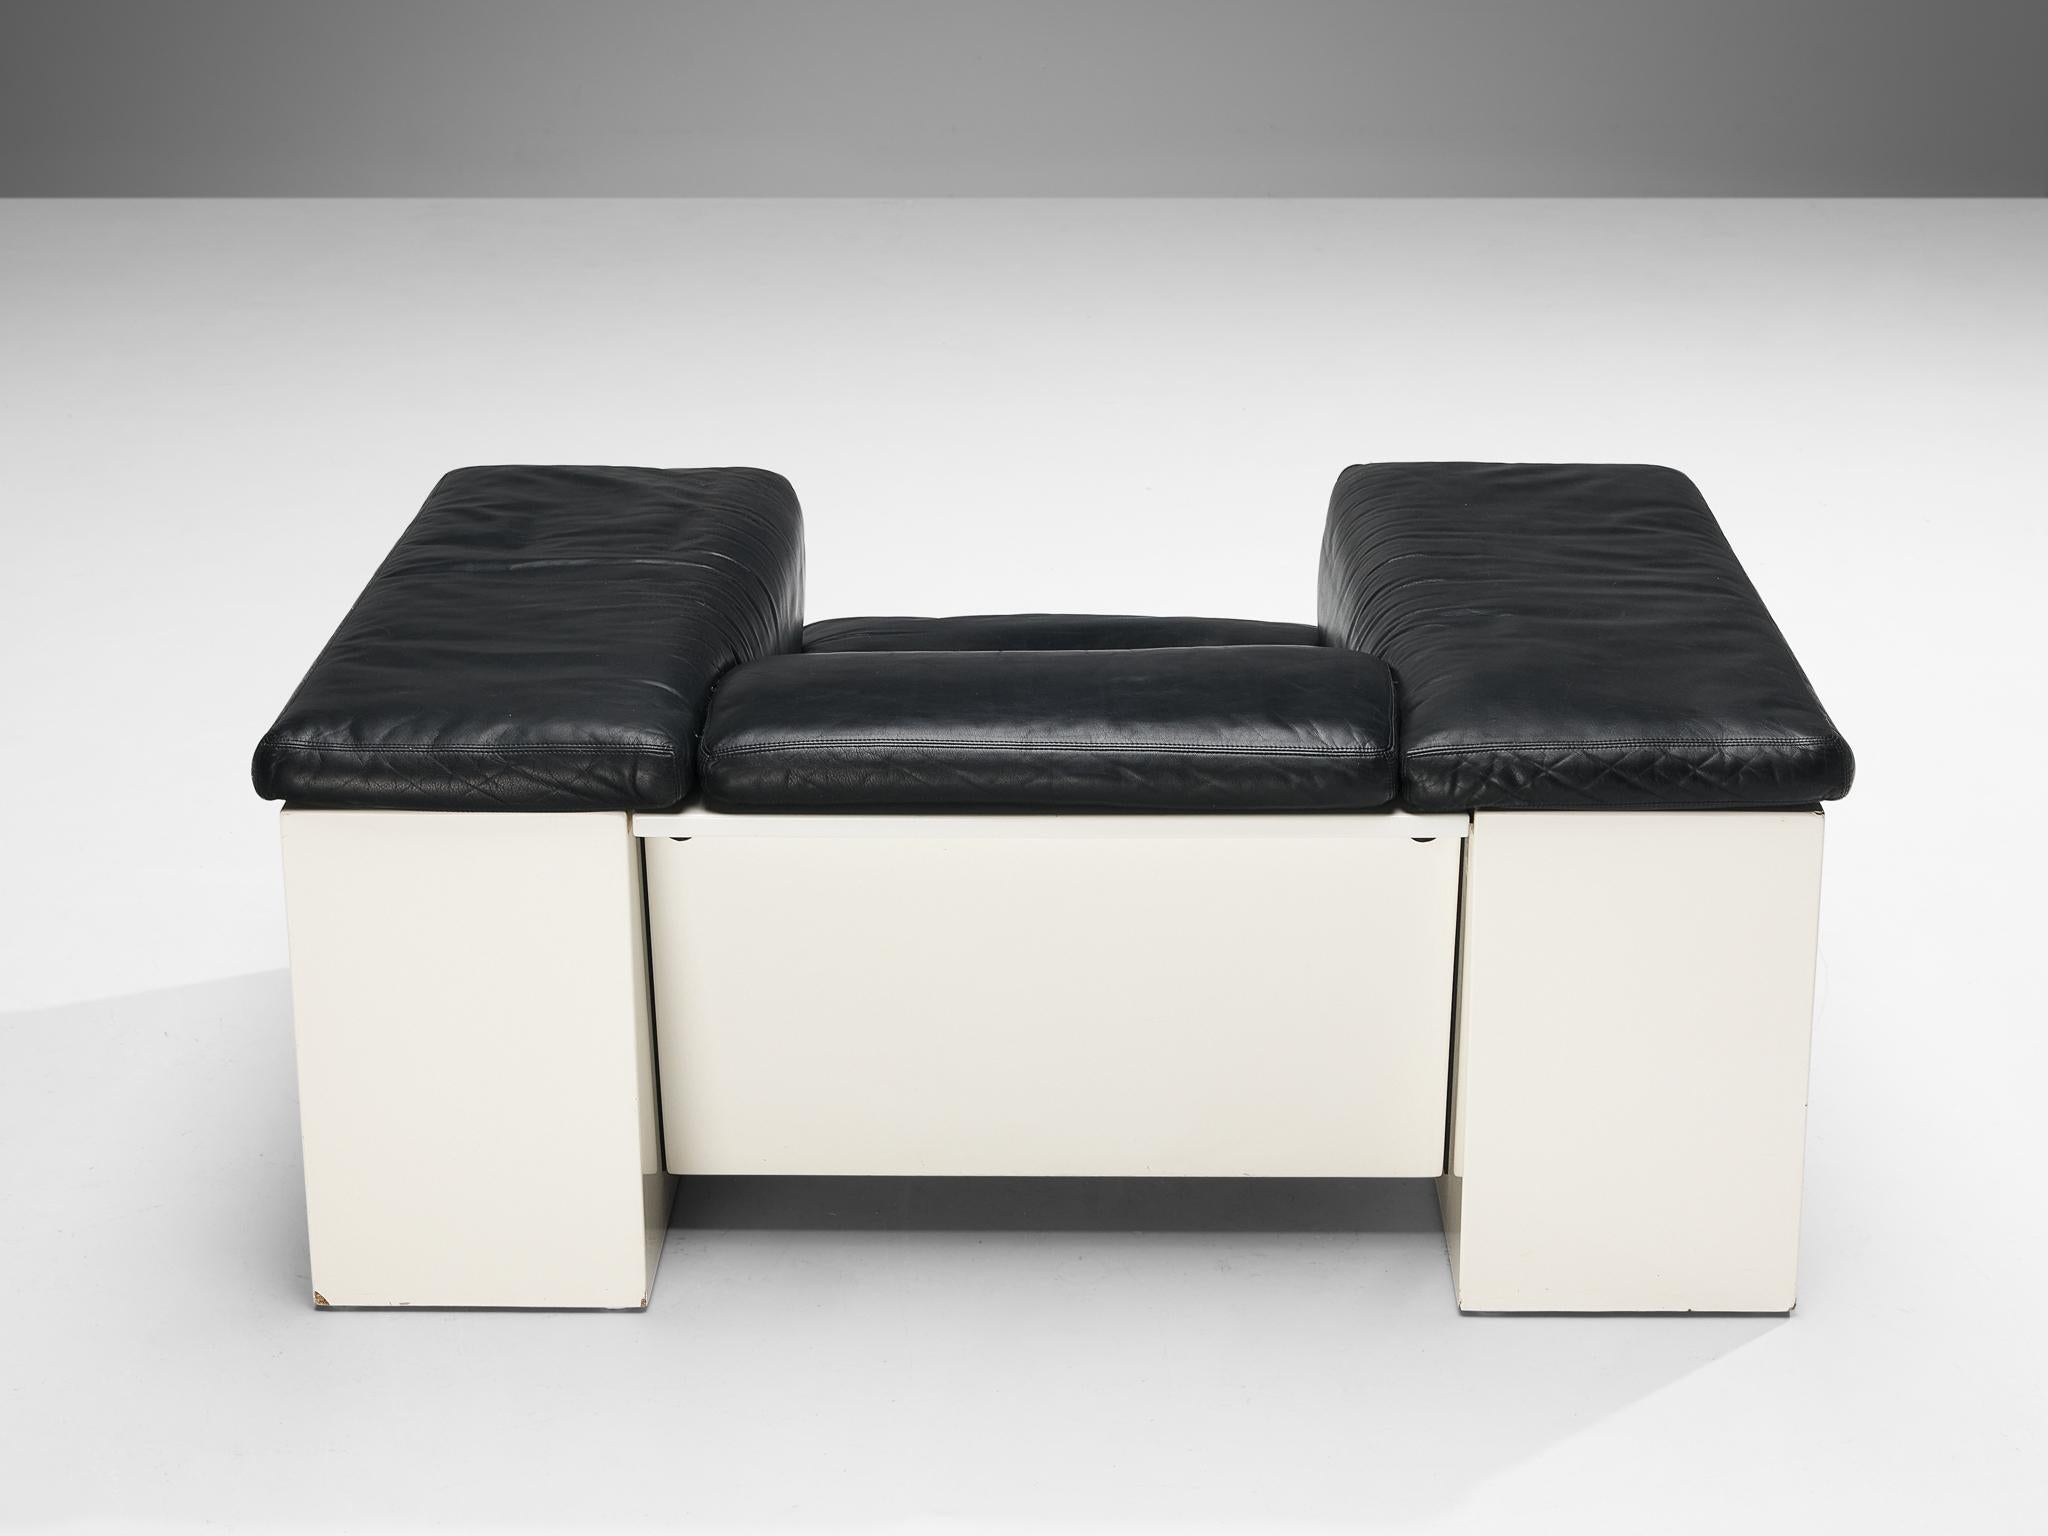 Cini Boeri for Knoll 'Brigadiere' Living Room Set in Black Leather 2